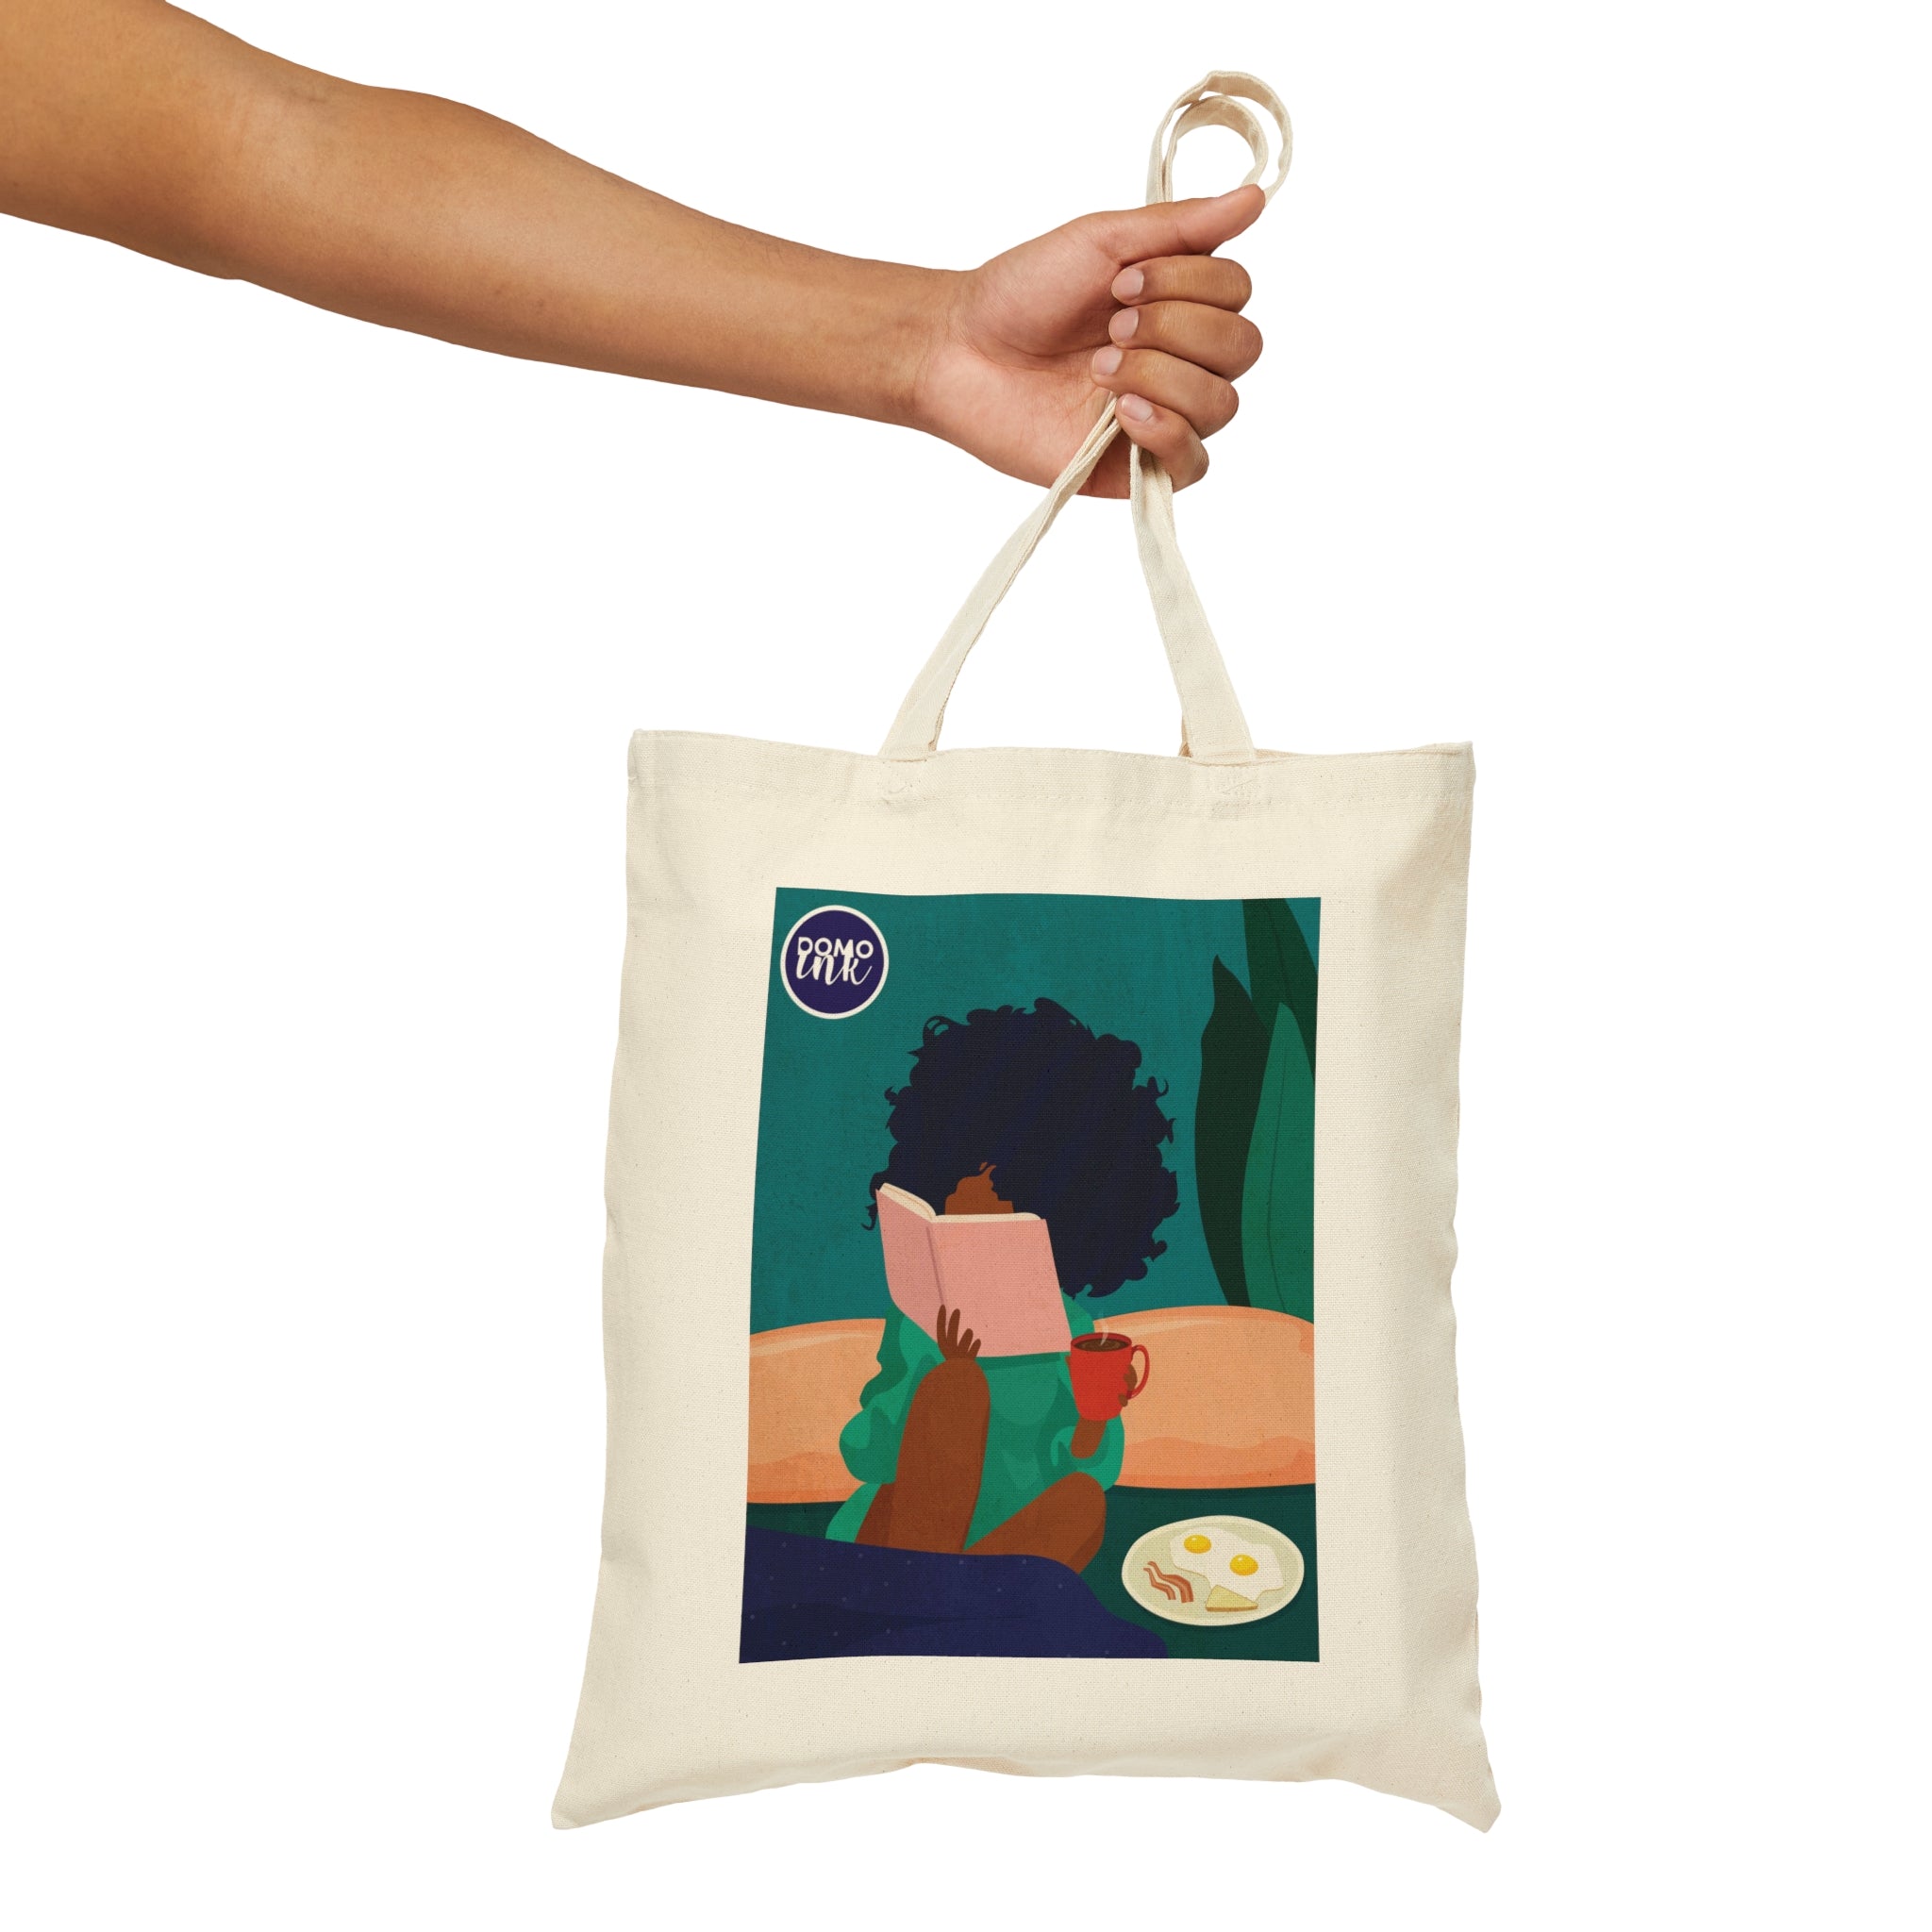 "Stay Home No. 5" Cotton Canvas Tote Bag